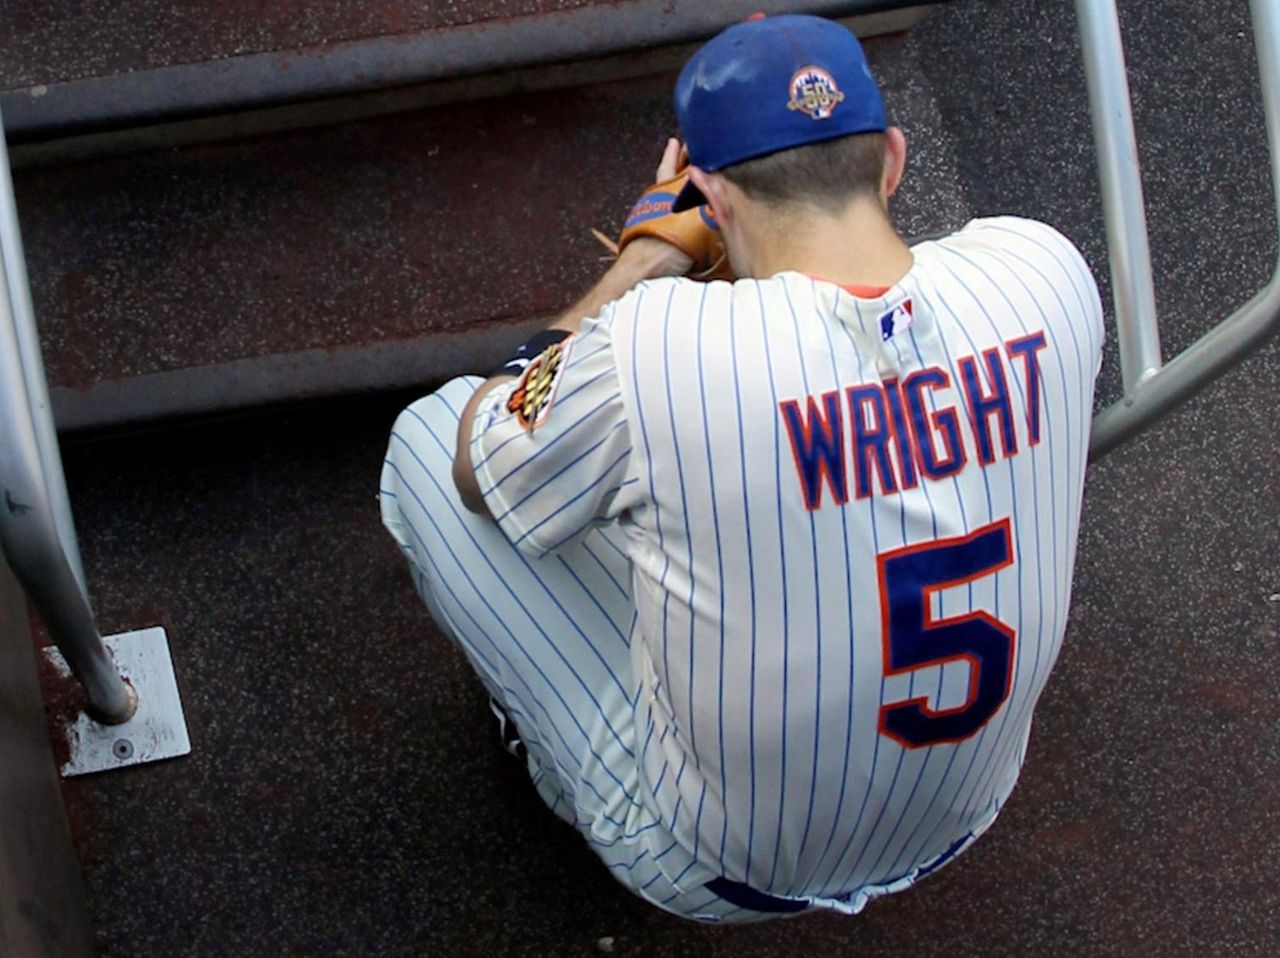 David Wright never gave up, never slowed down - Newsday